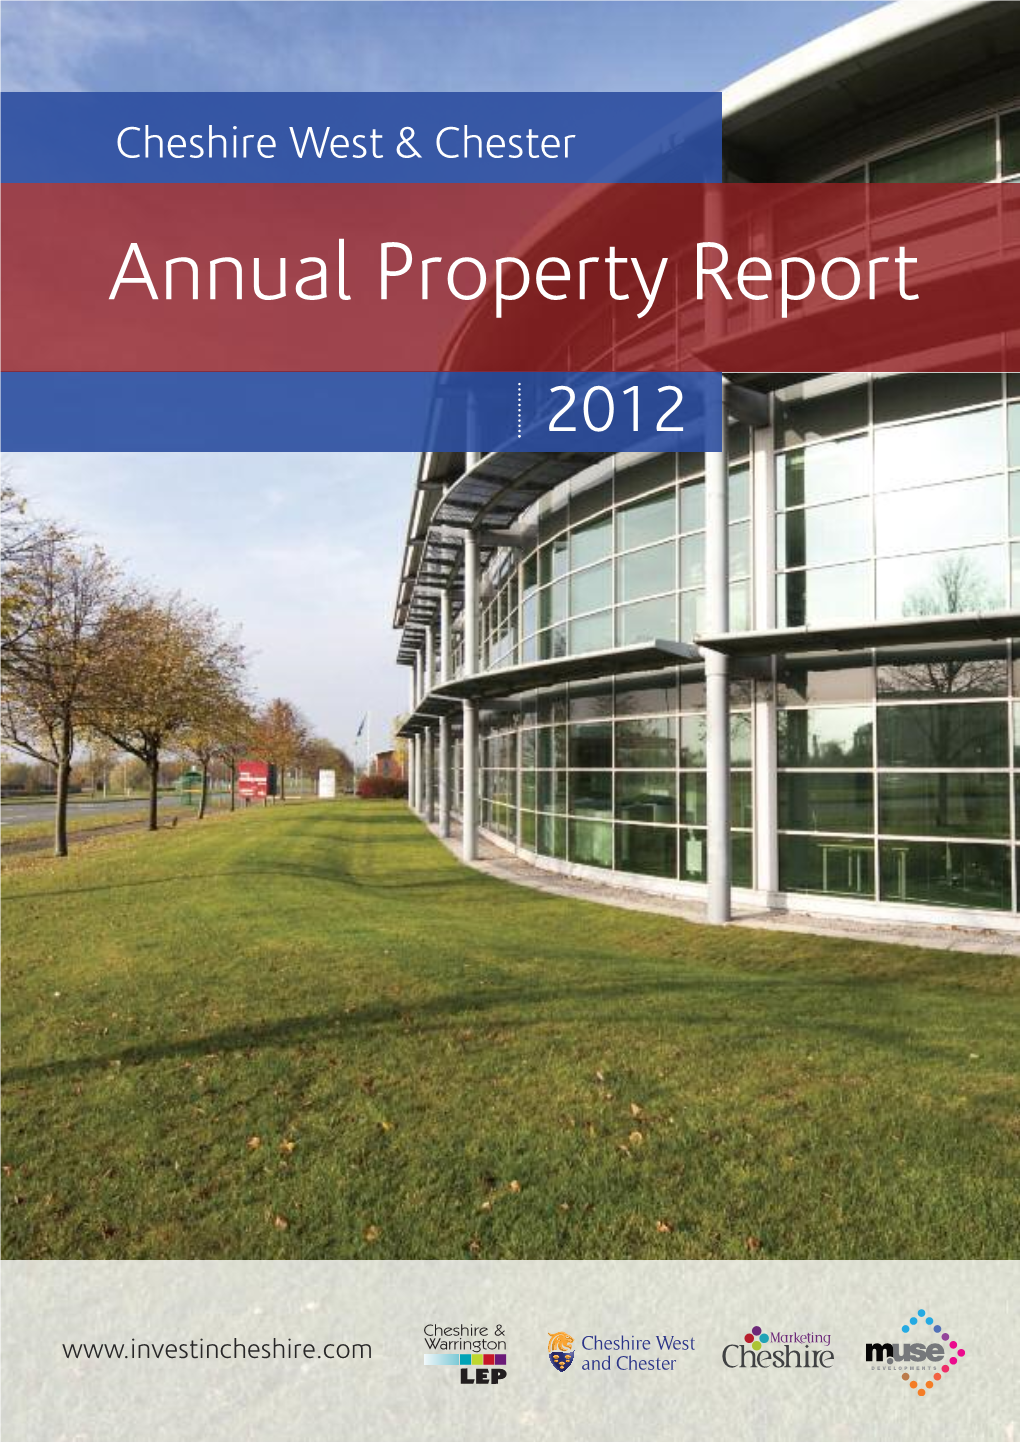 Annual Property Report 2012